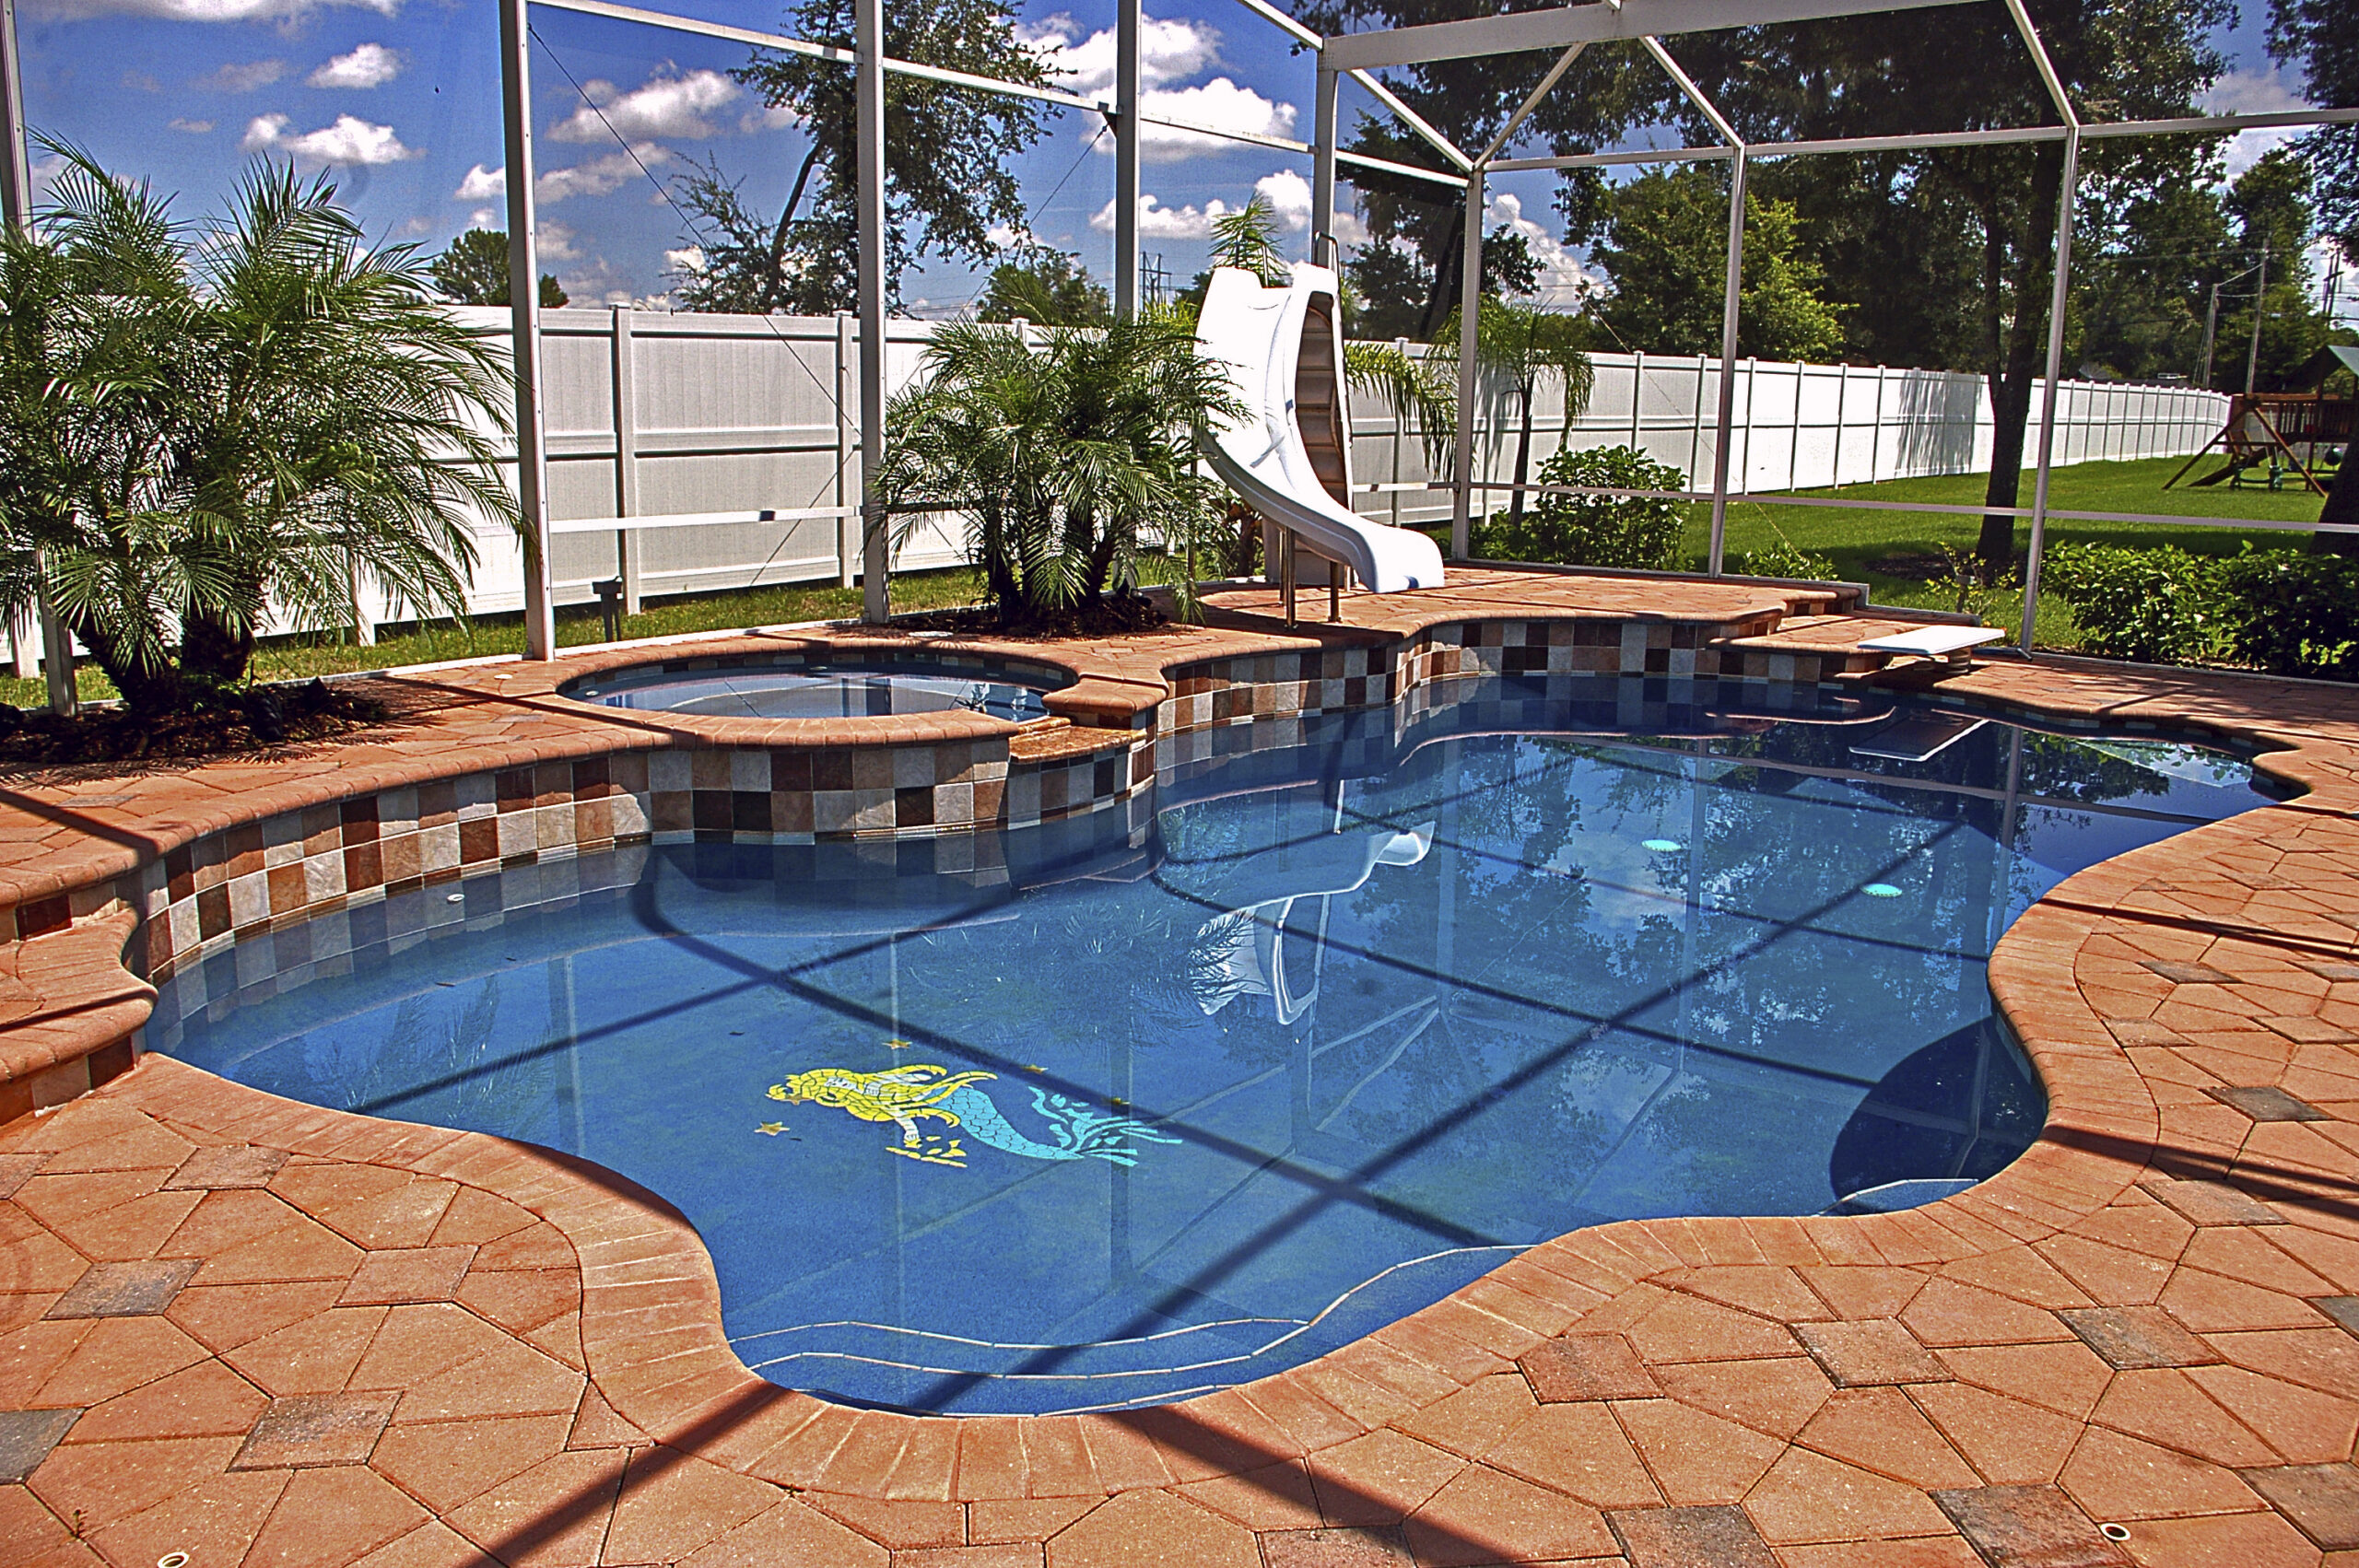 Does Your Pool Need a Pool Deck?